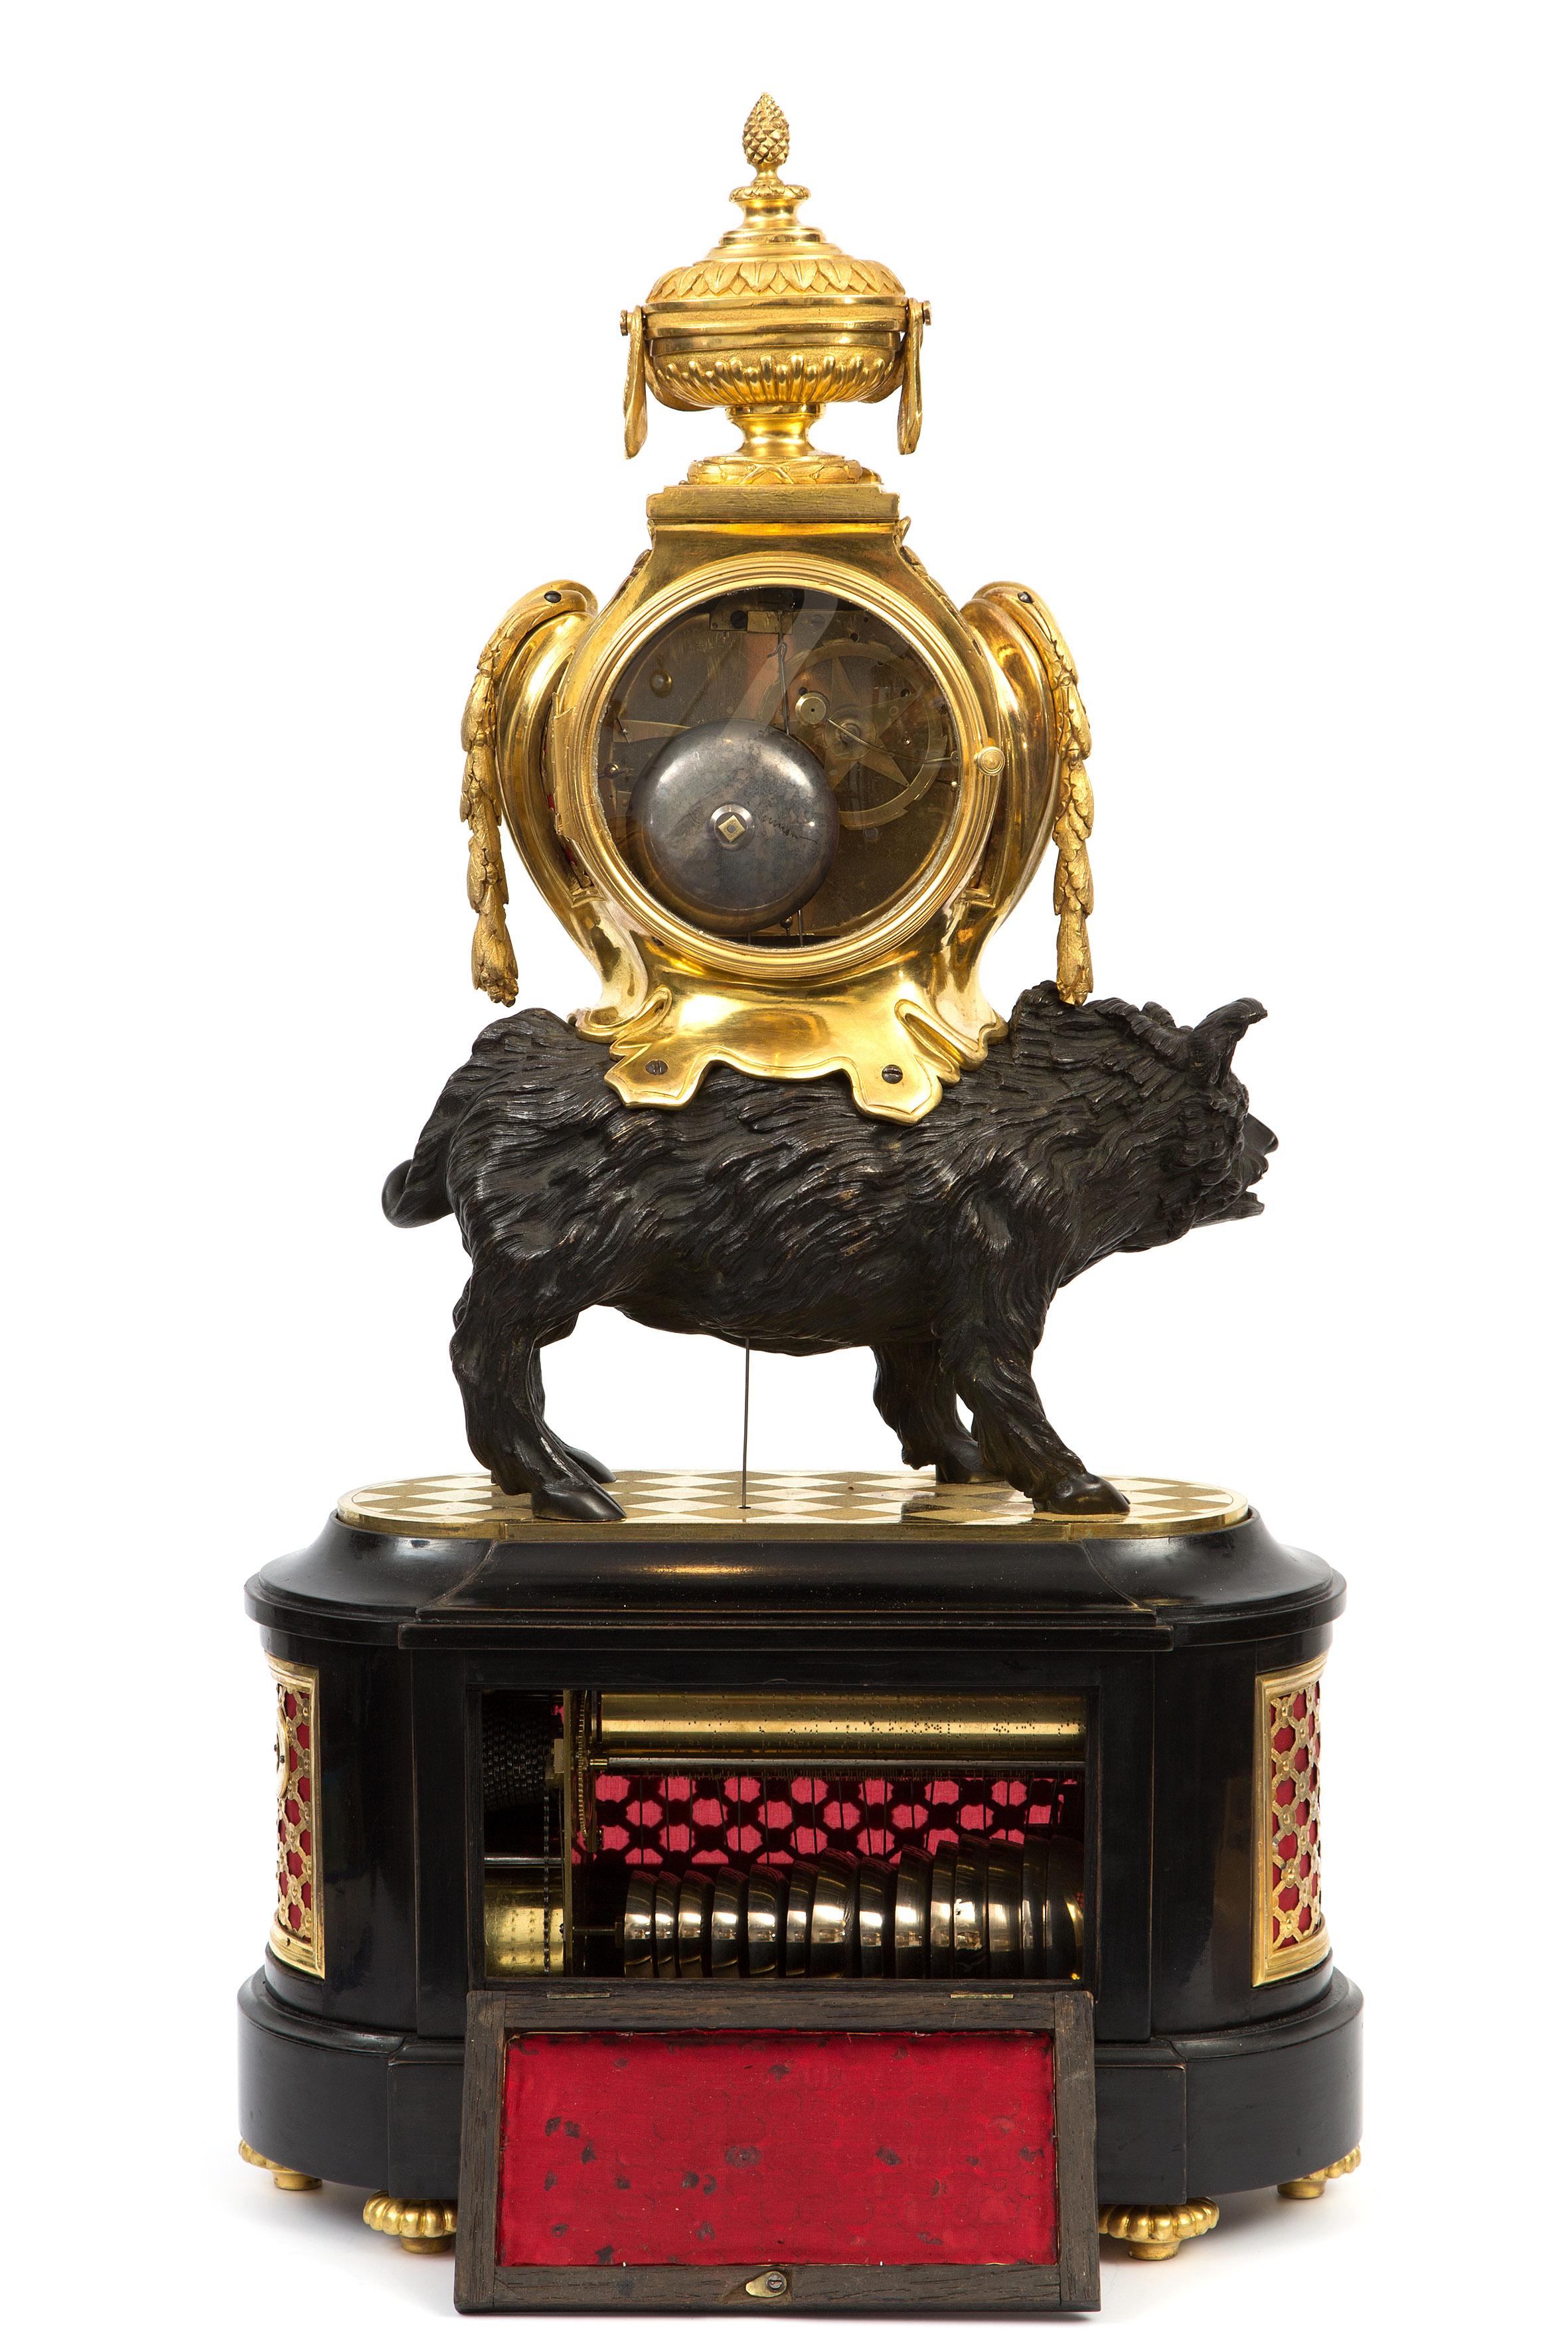 An extremely rare and important splendid Louis XV bronze pendulum clock “Pendule au Sanglier”, with half hour/hour self strike and musical movement with 9 tunes that activates on the hour and can also be activated manually
Case: ormulu and patinated